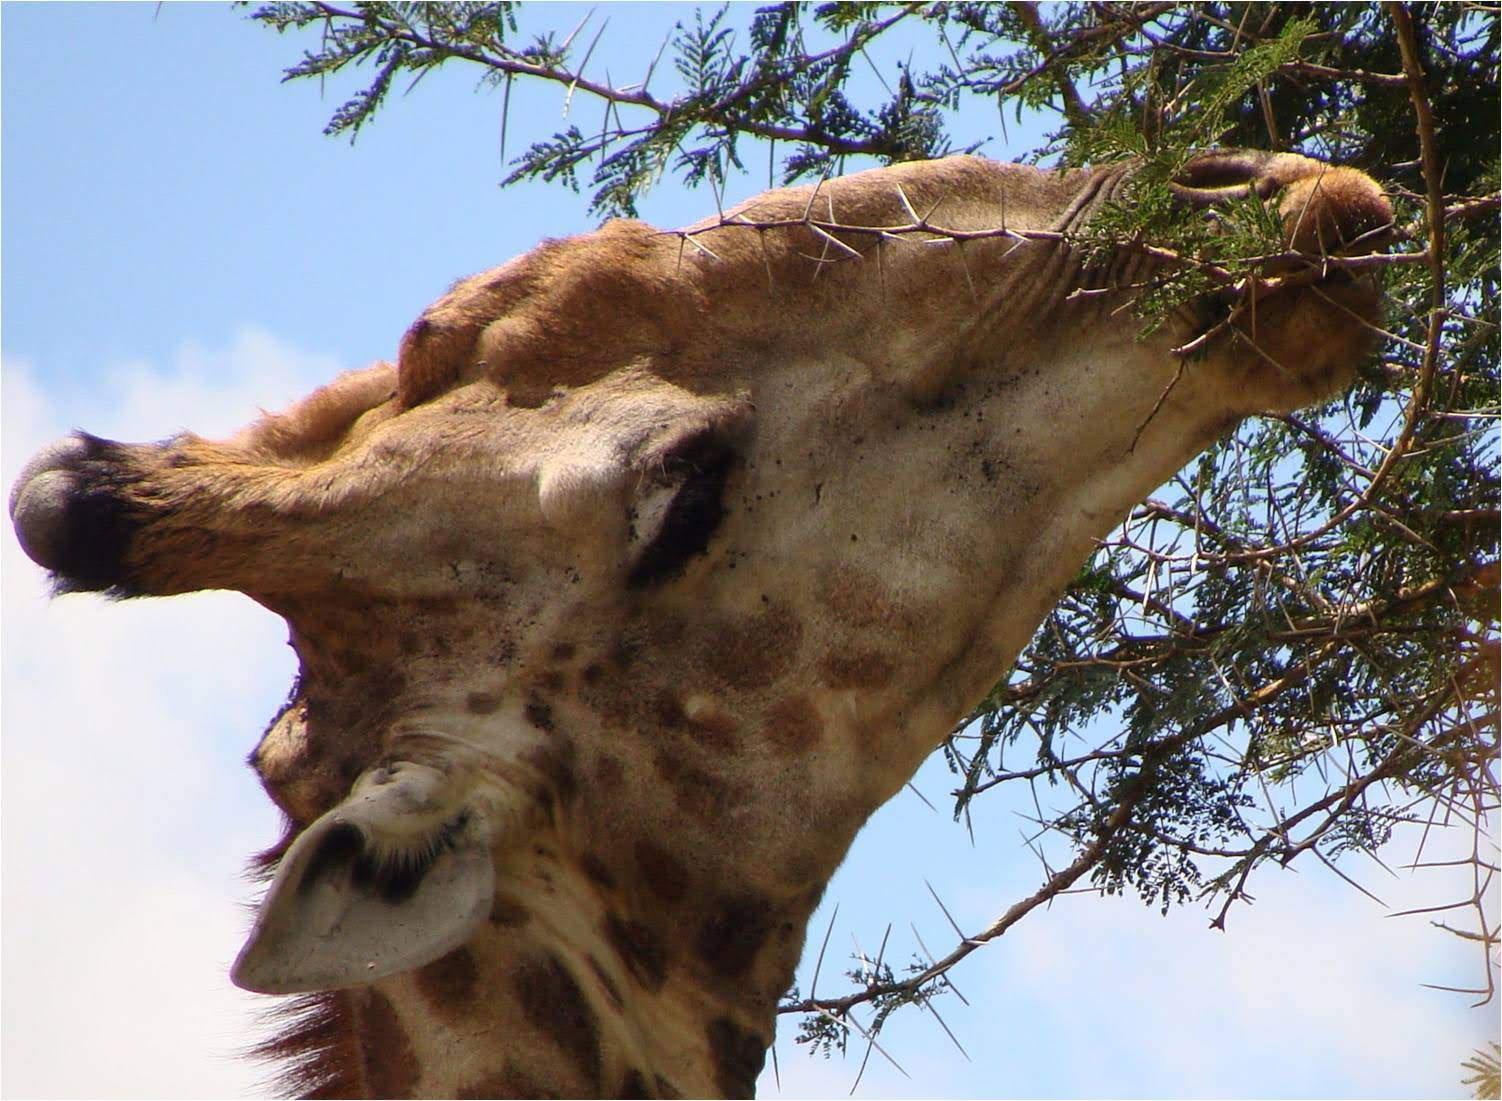 A giraffe eats acacia leaves in Zambia; a camel passes the pyramids in Egypt. Can you tell these animals are related?